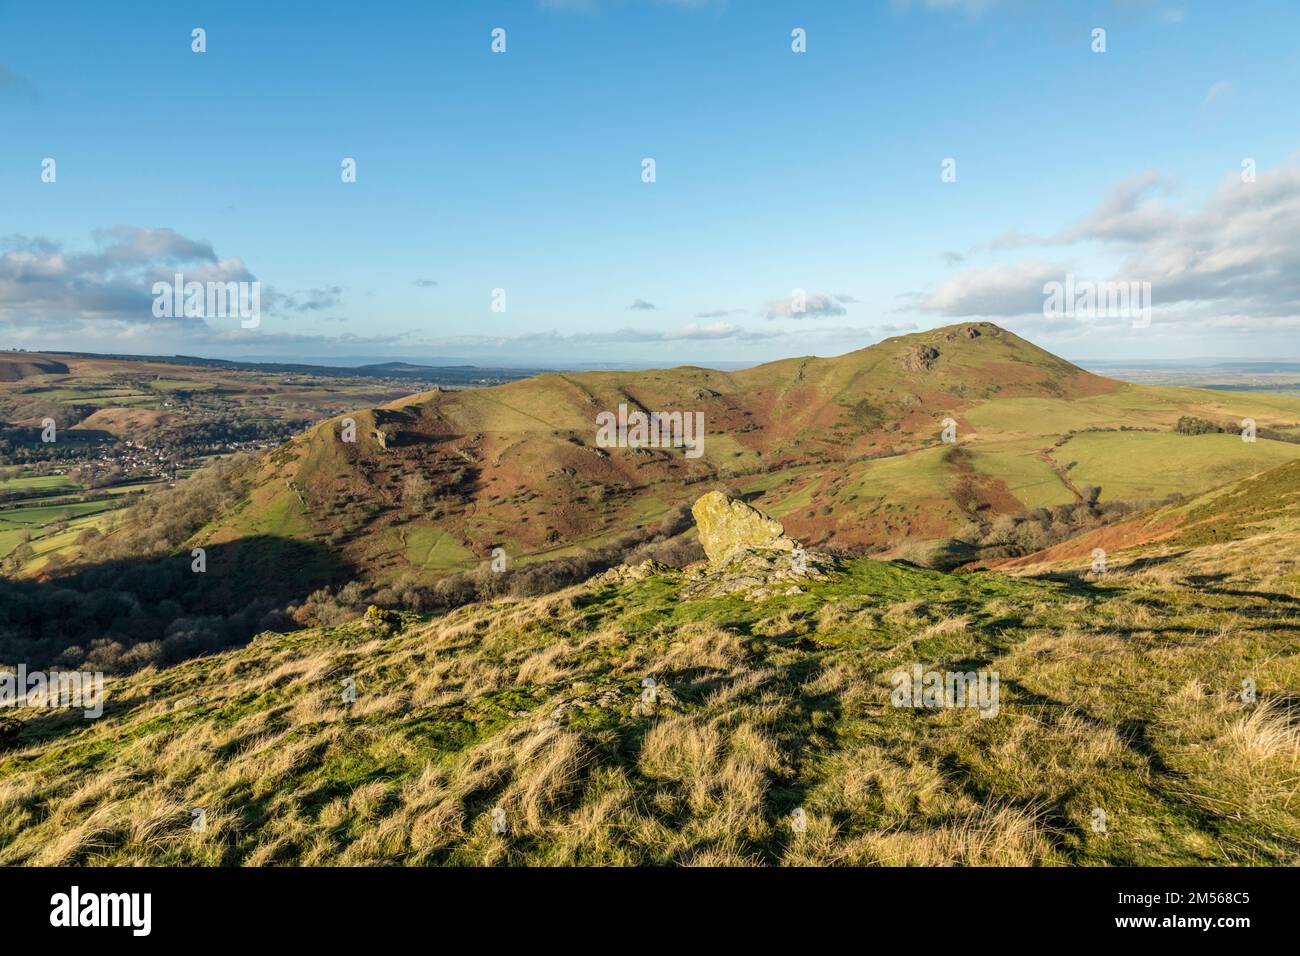 Caer Caradoc, a hill in Shropshire, England, with a Bronze Age or Iron Age Hill fort on top. Stock Photo